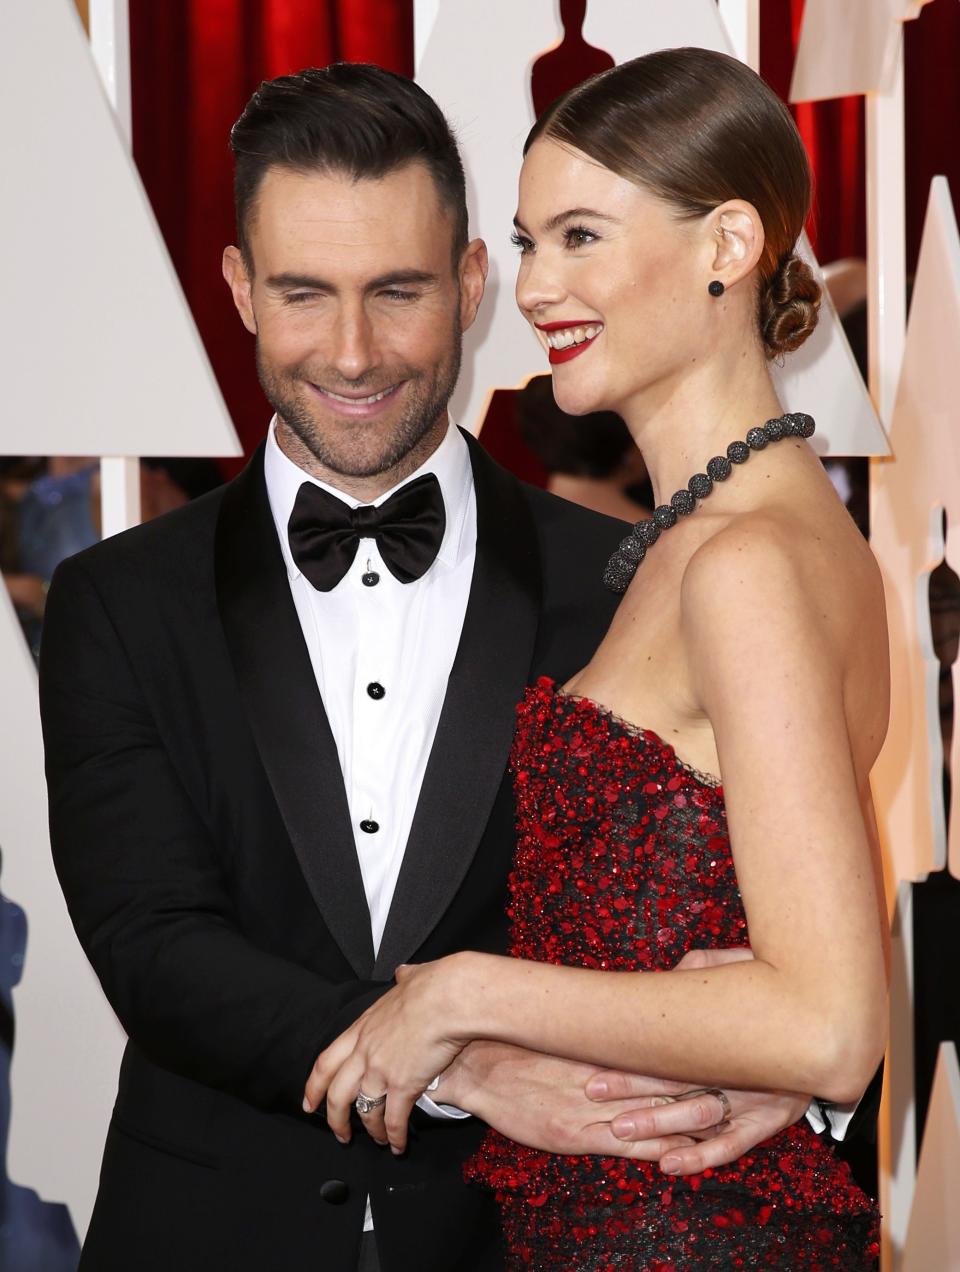 Singer Adam Levine and his wife Behati Prinsloo arrive at the 87th Academy Awards in Hollywood, California